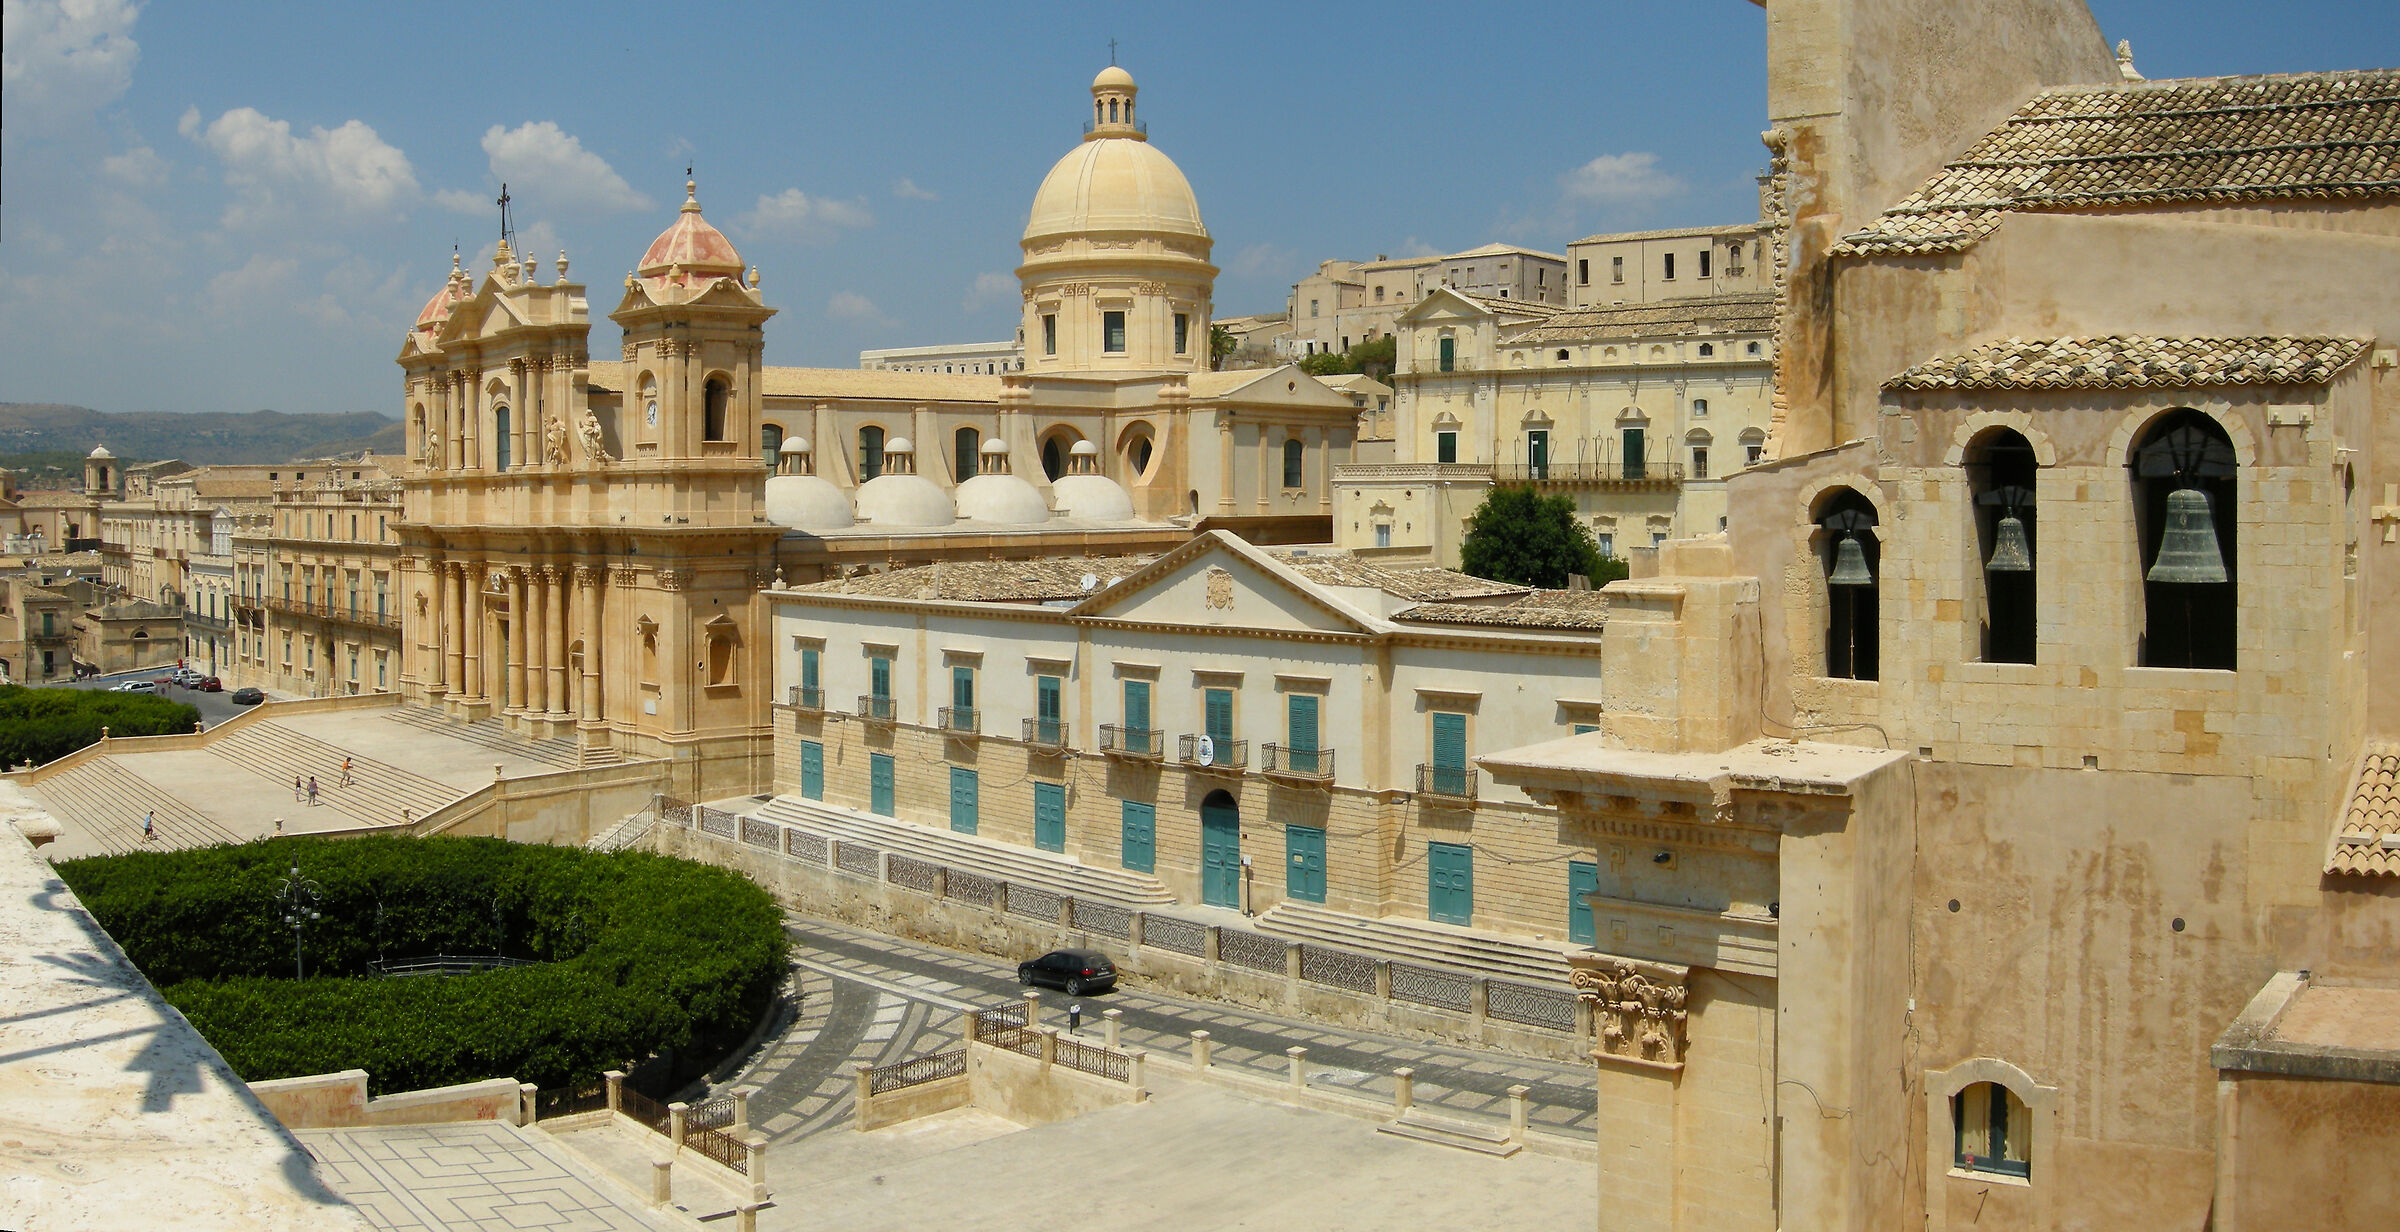 The cathedral of Noto (SR)...